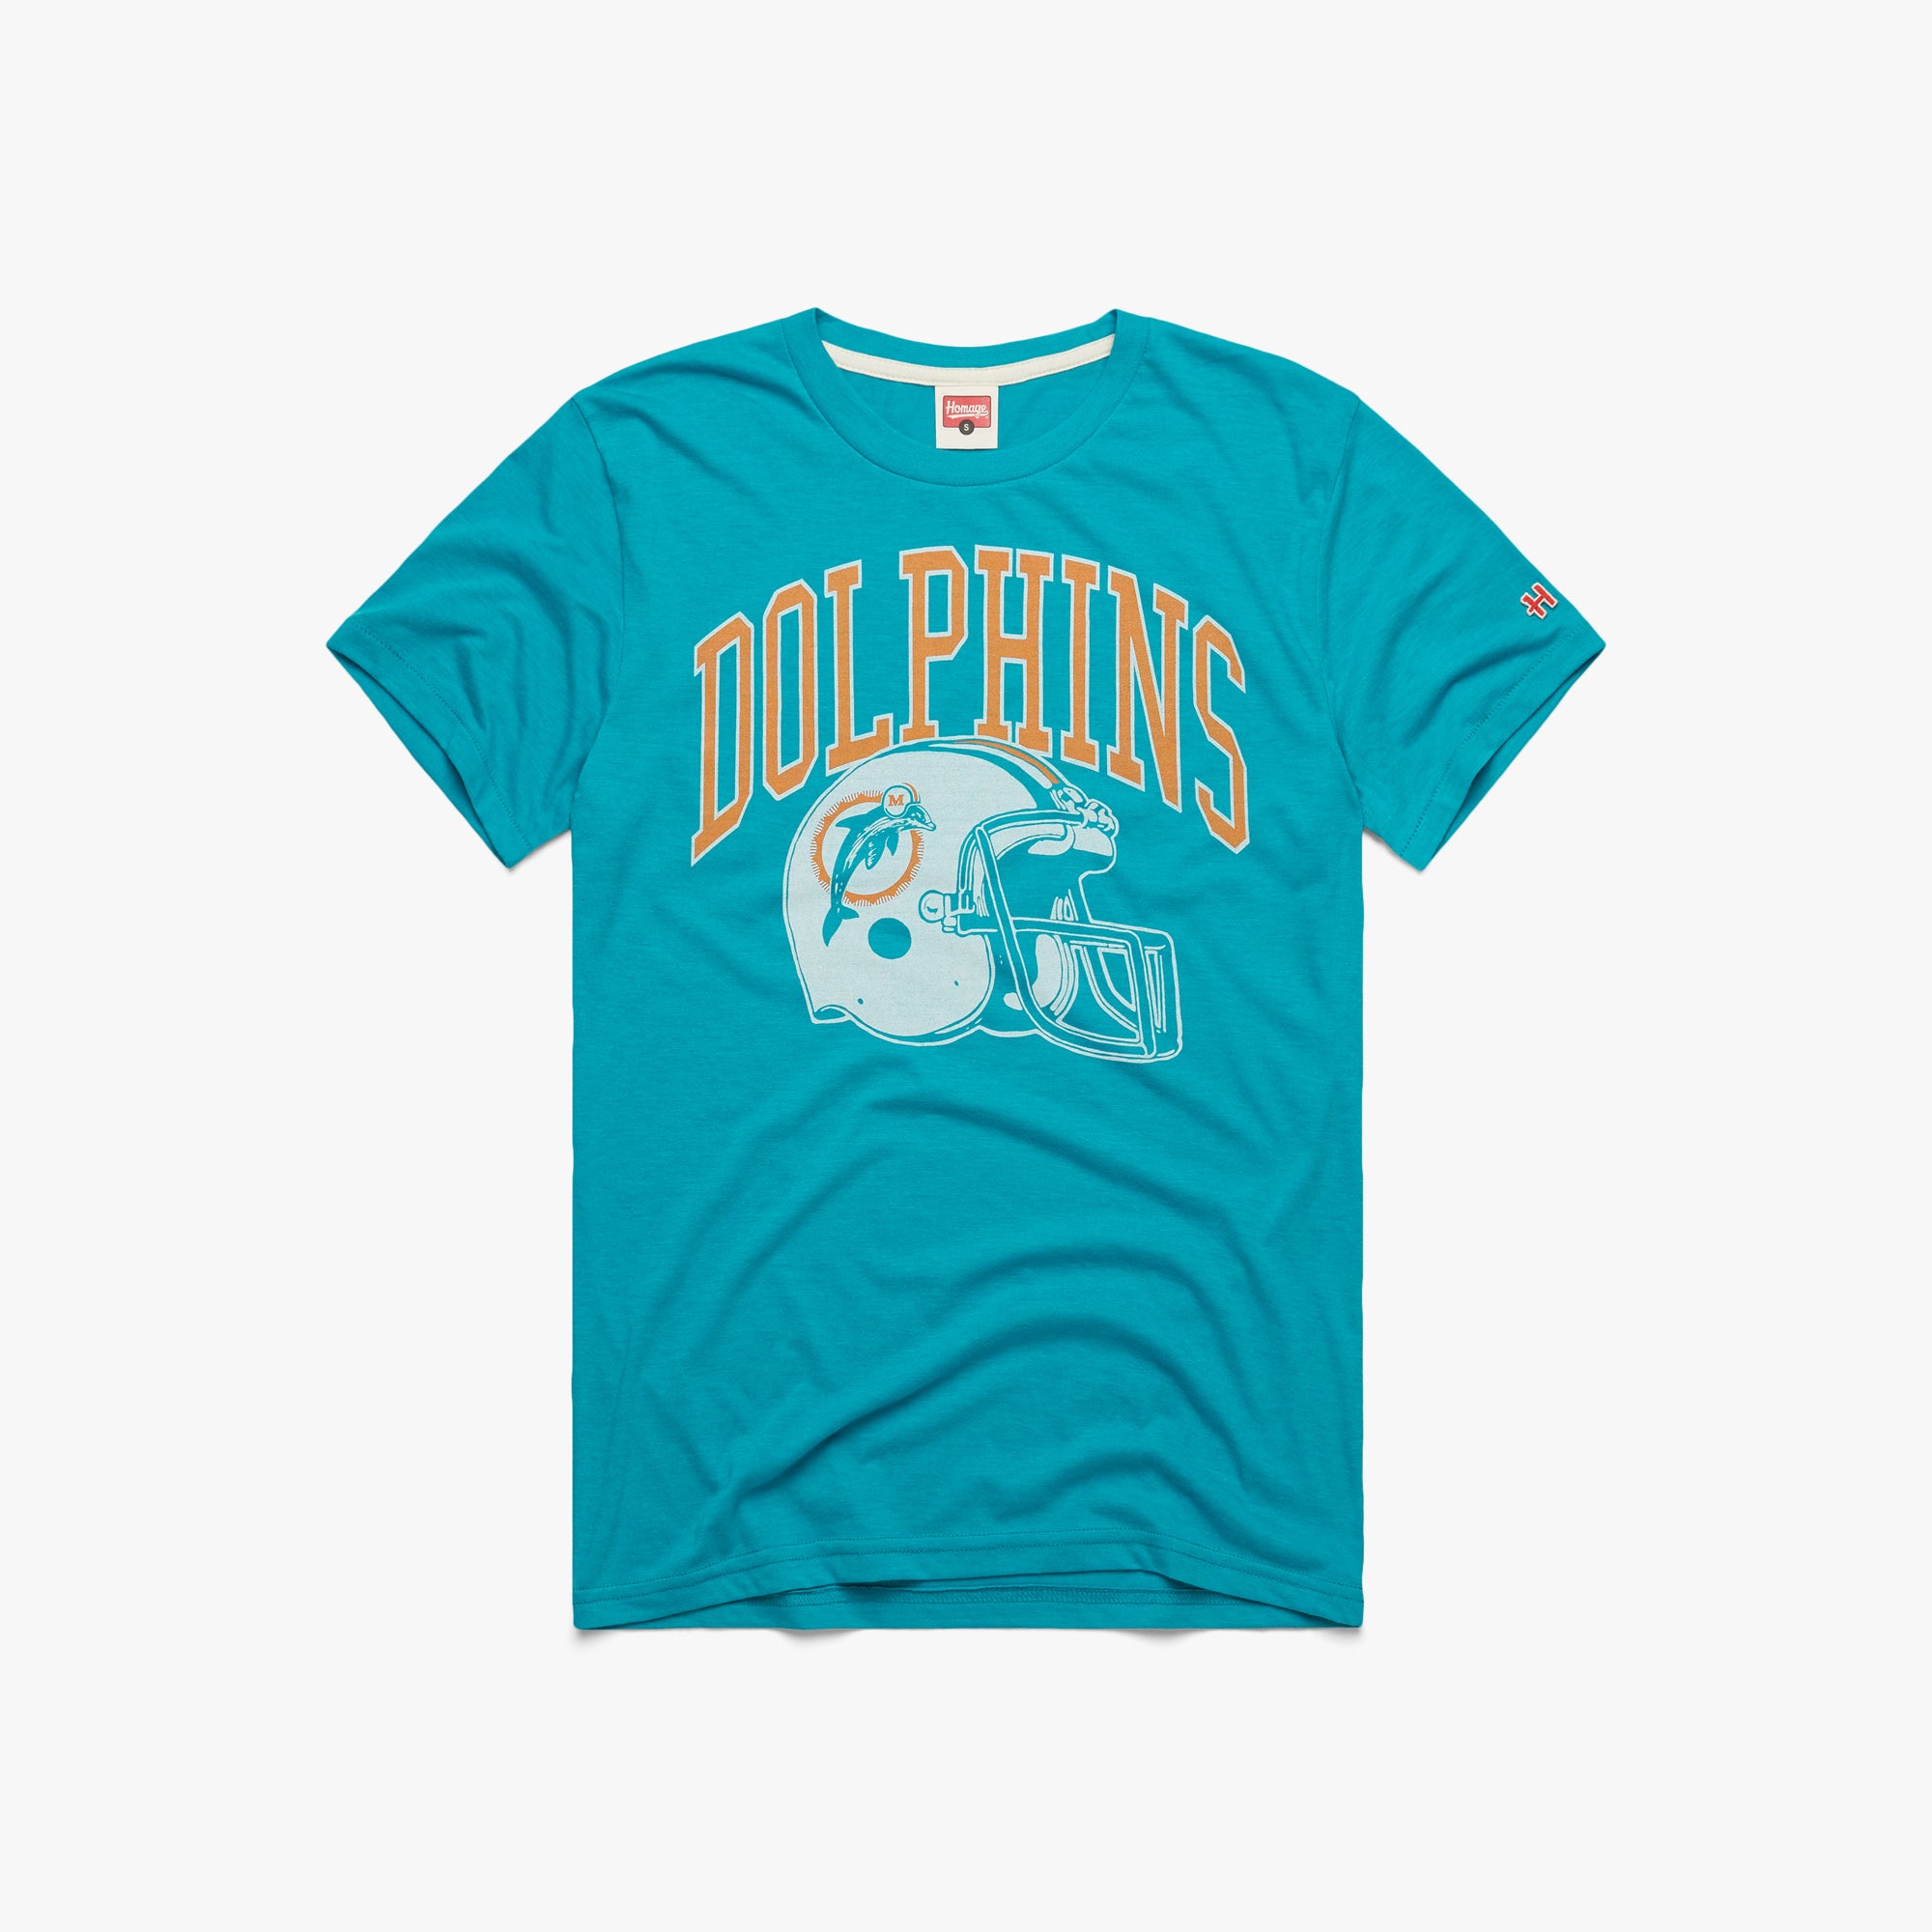 Dolphins jersey back in stock